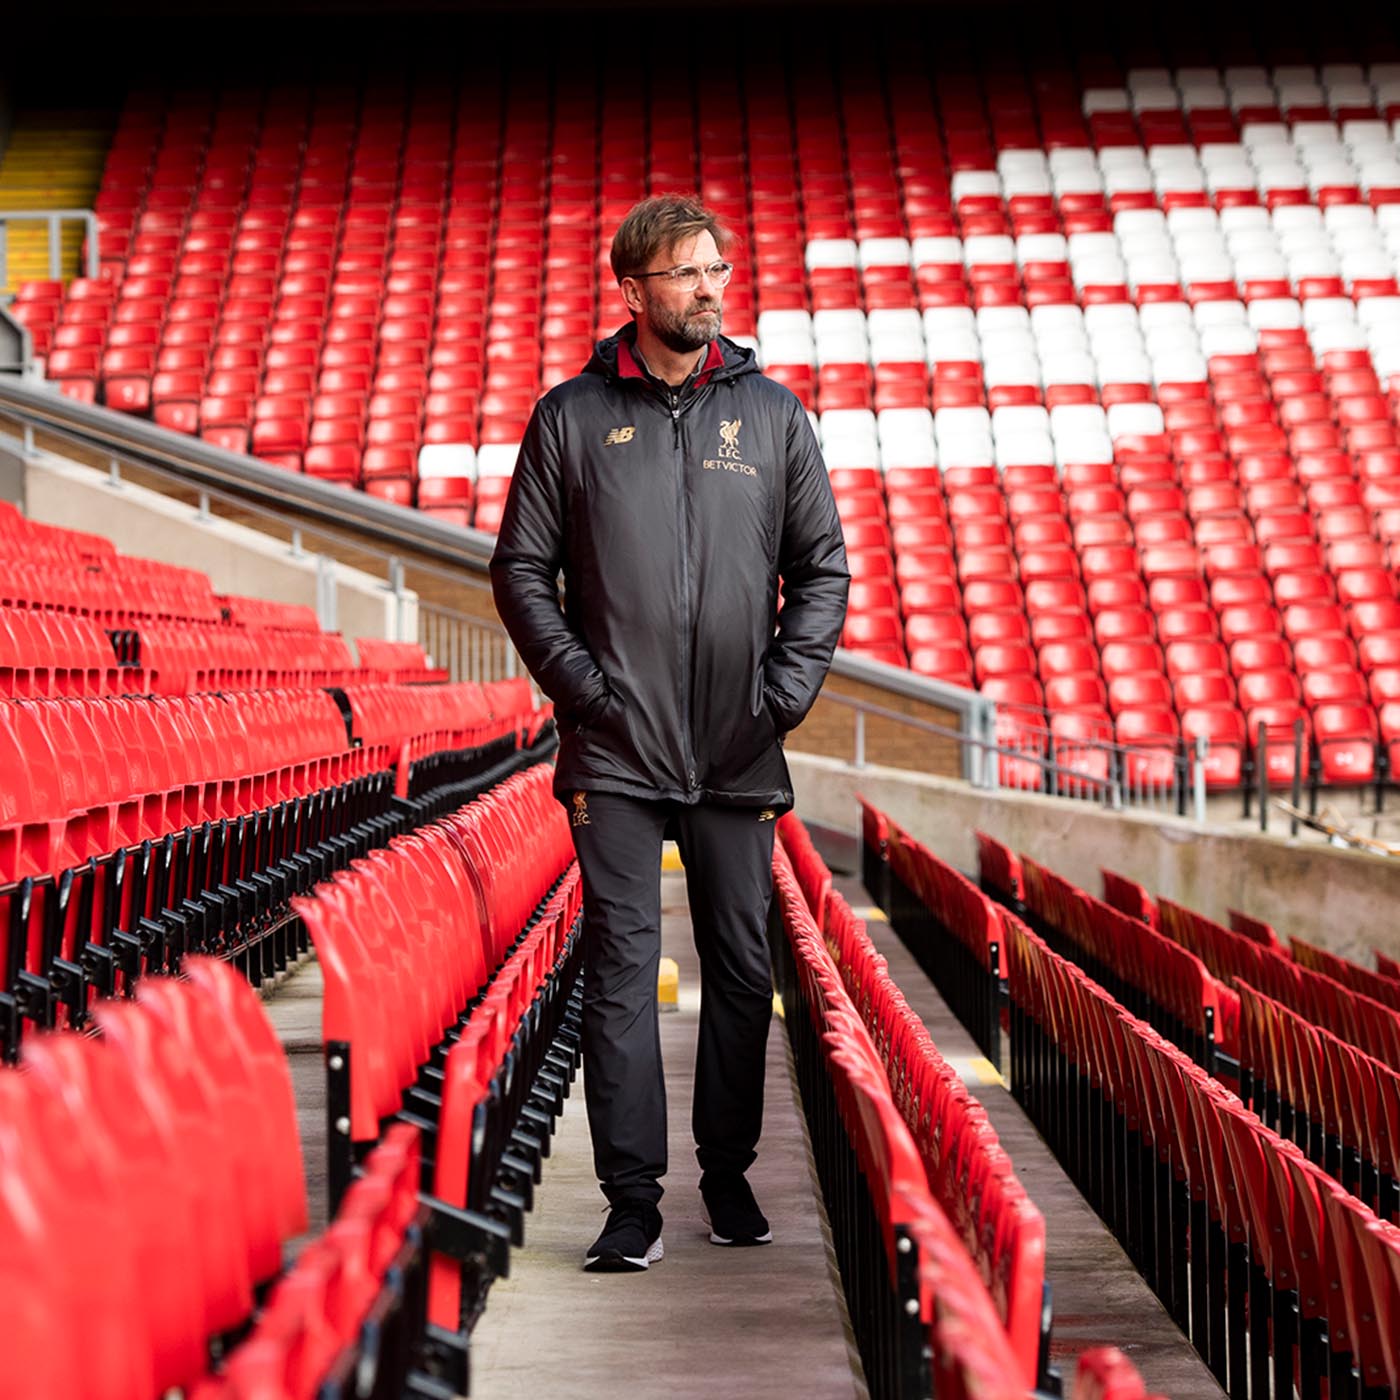 New Balance Liverpool Managers Collection Klopp body_0003_06.08.18 09.00 (3) FW18 Managers Collection 0950-1.jpg